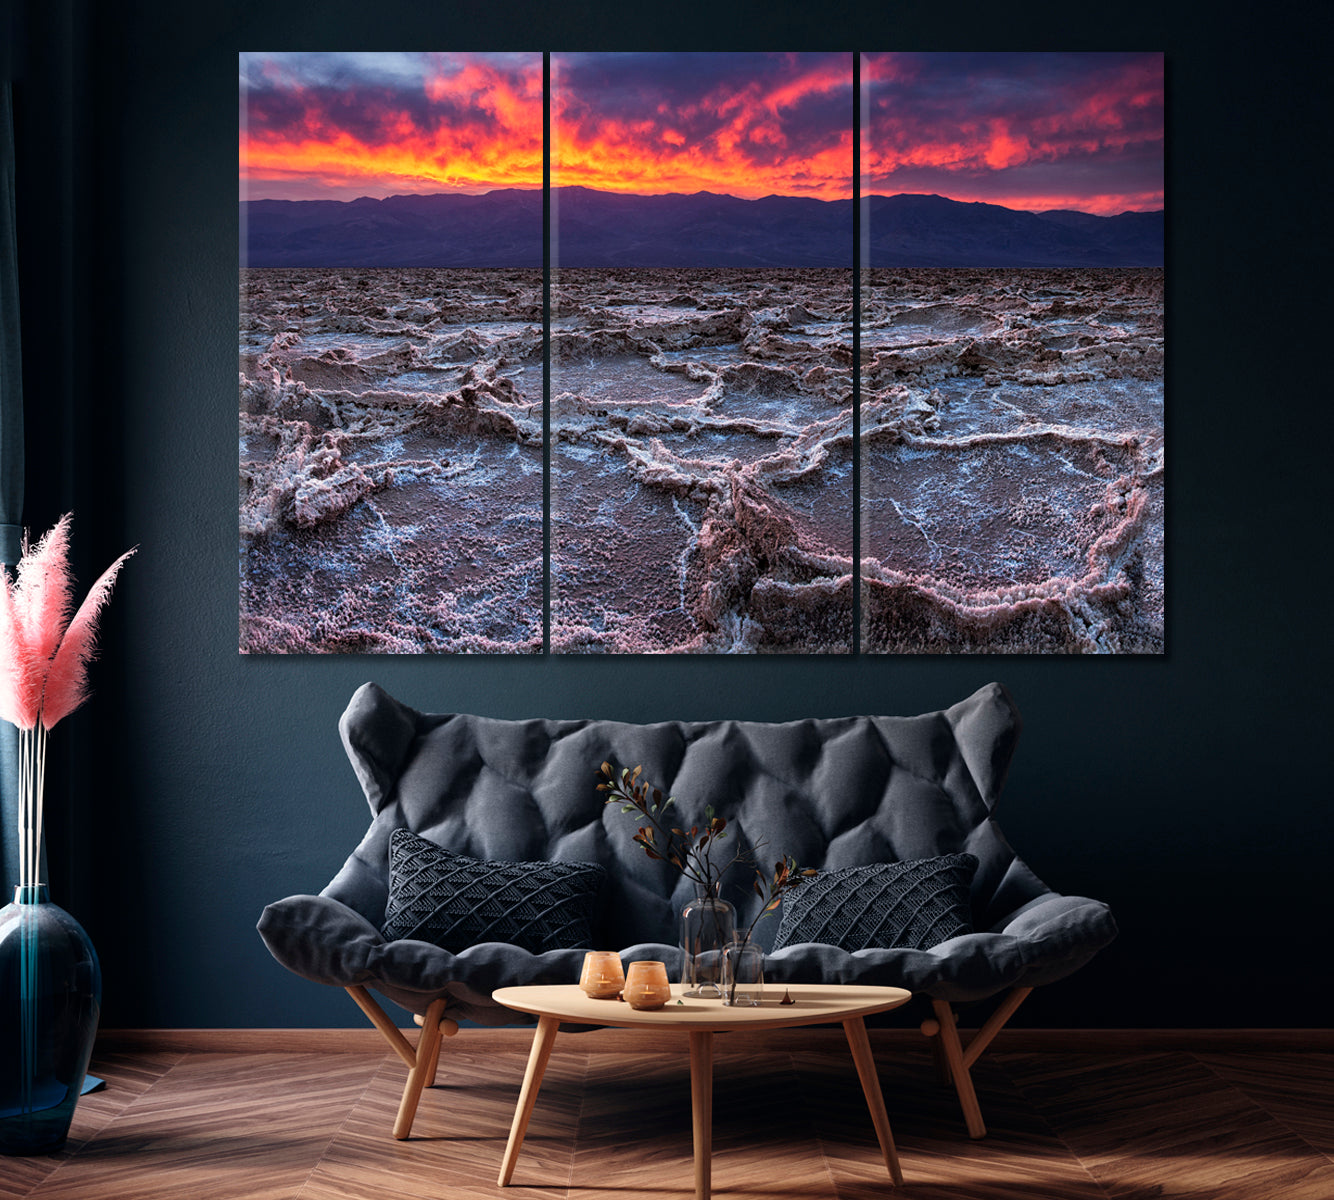 Death Valley National Park California US Canvas Print ArtLexy 3 Panels 36"x24" inches 